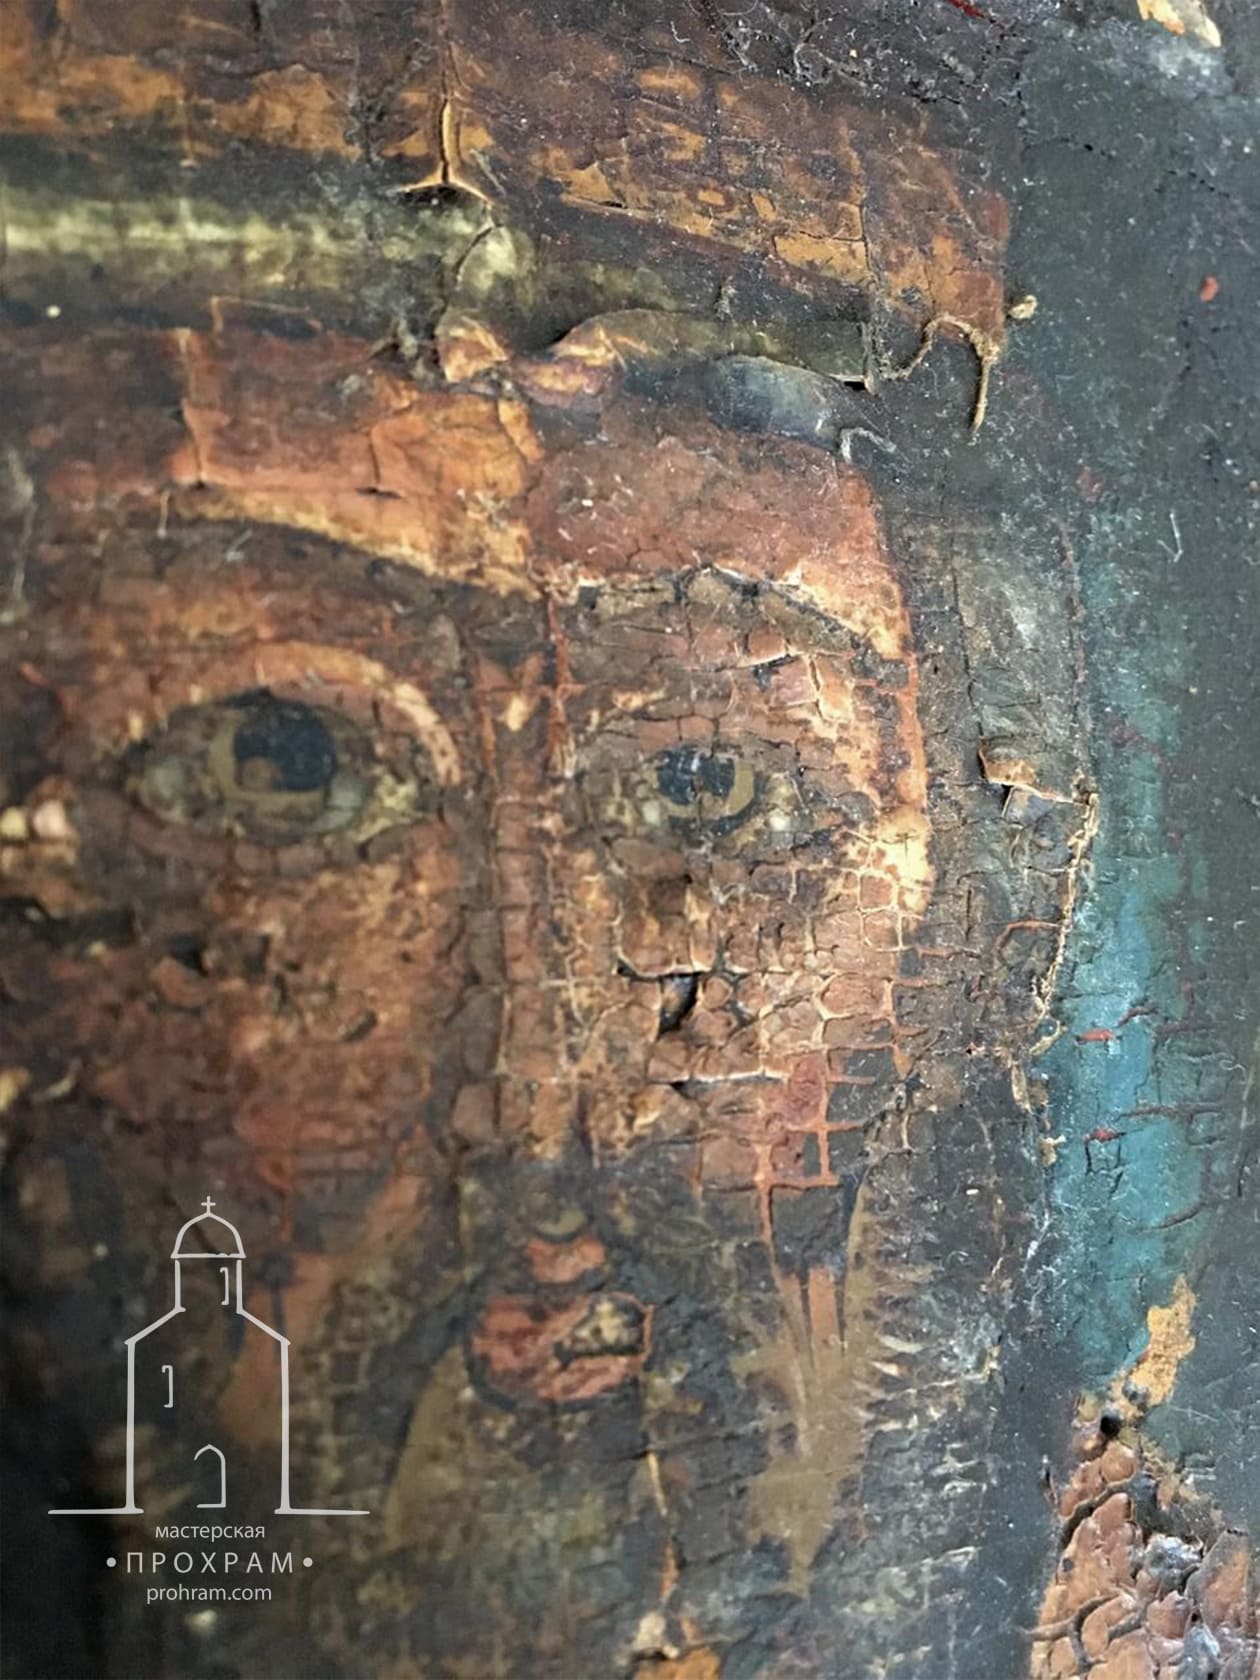 restoration, restoration of icons, Icon of St. Nicholas the Wonderworker, northern school of painting, the 19th century, restoration of icons stages